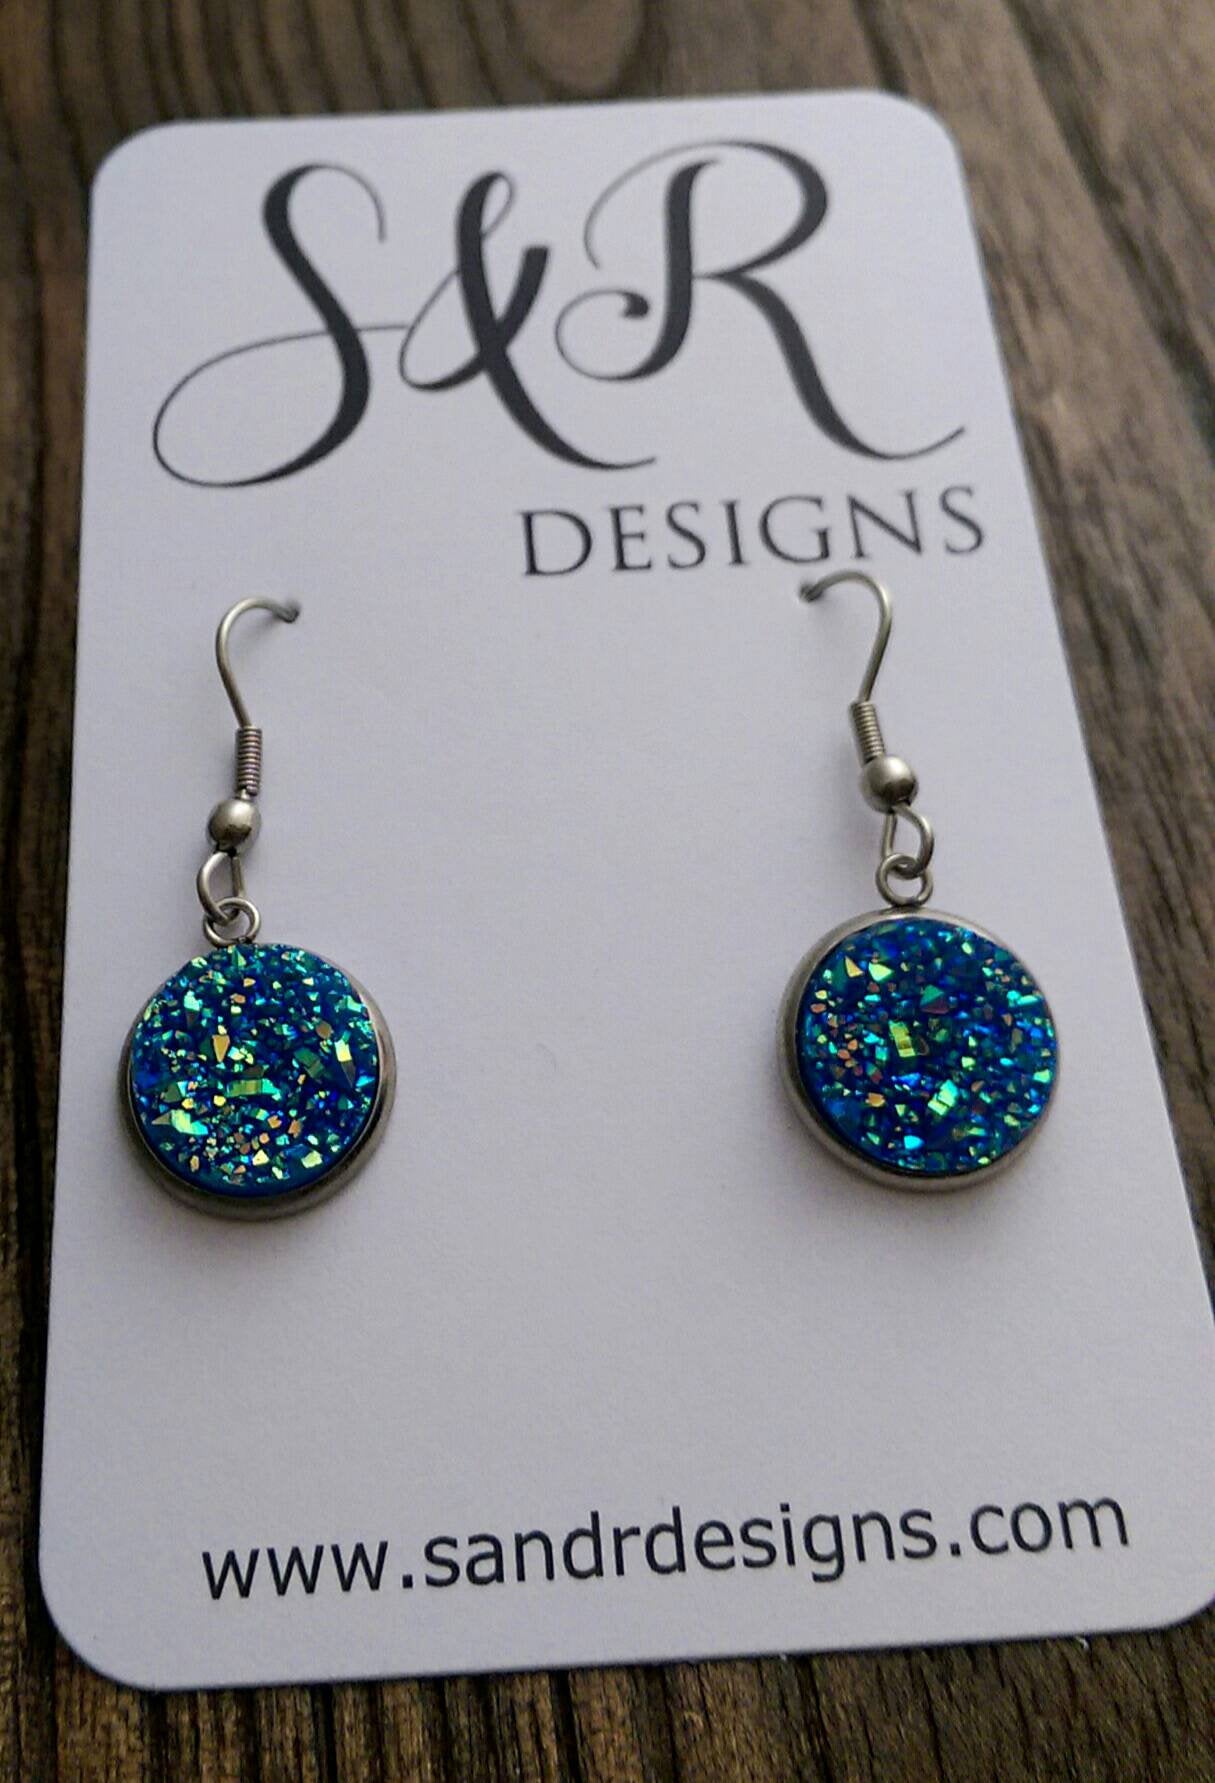 Dark Blue AB Sparkly Faux Druzy Dangle Earrings made of Stainless Steel - Silver and Resin Designs